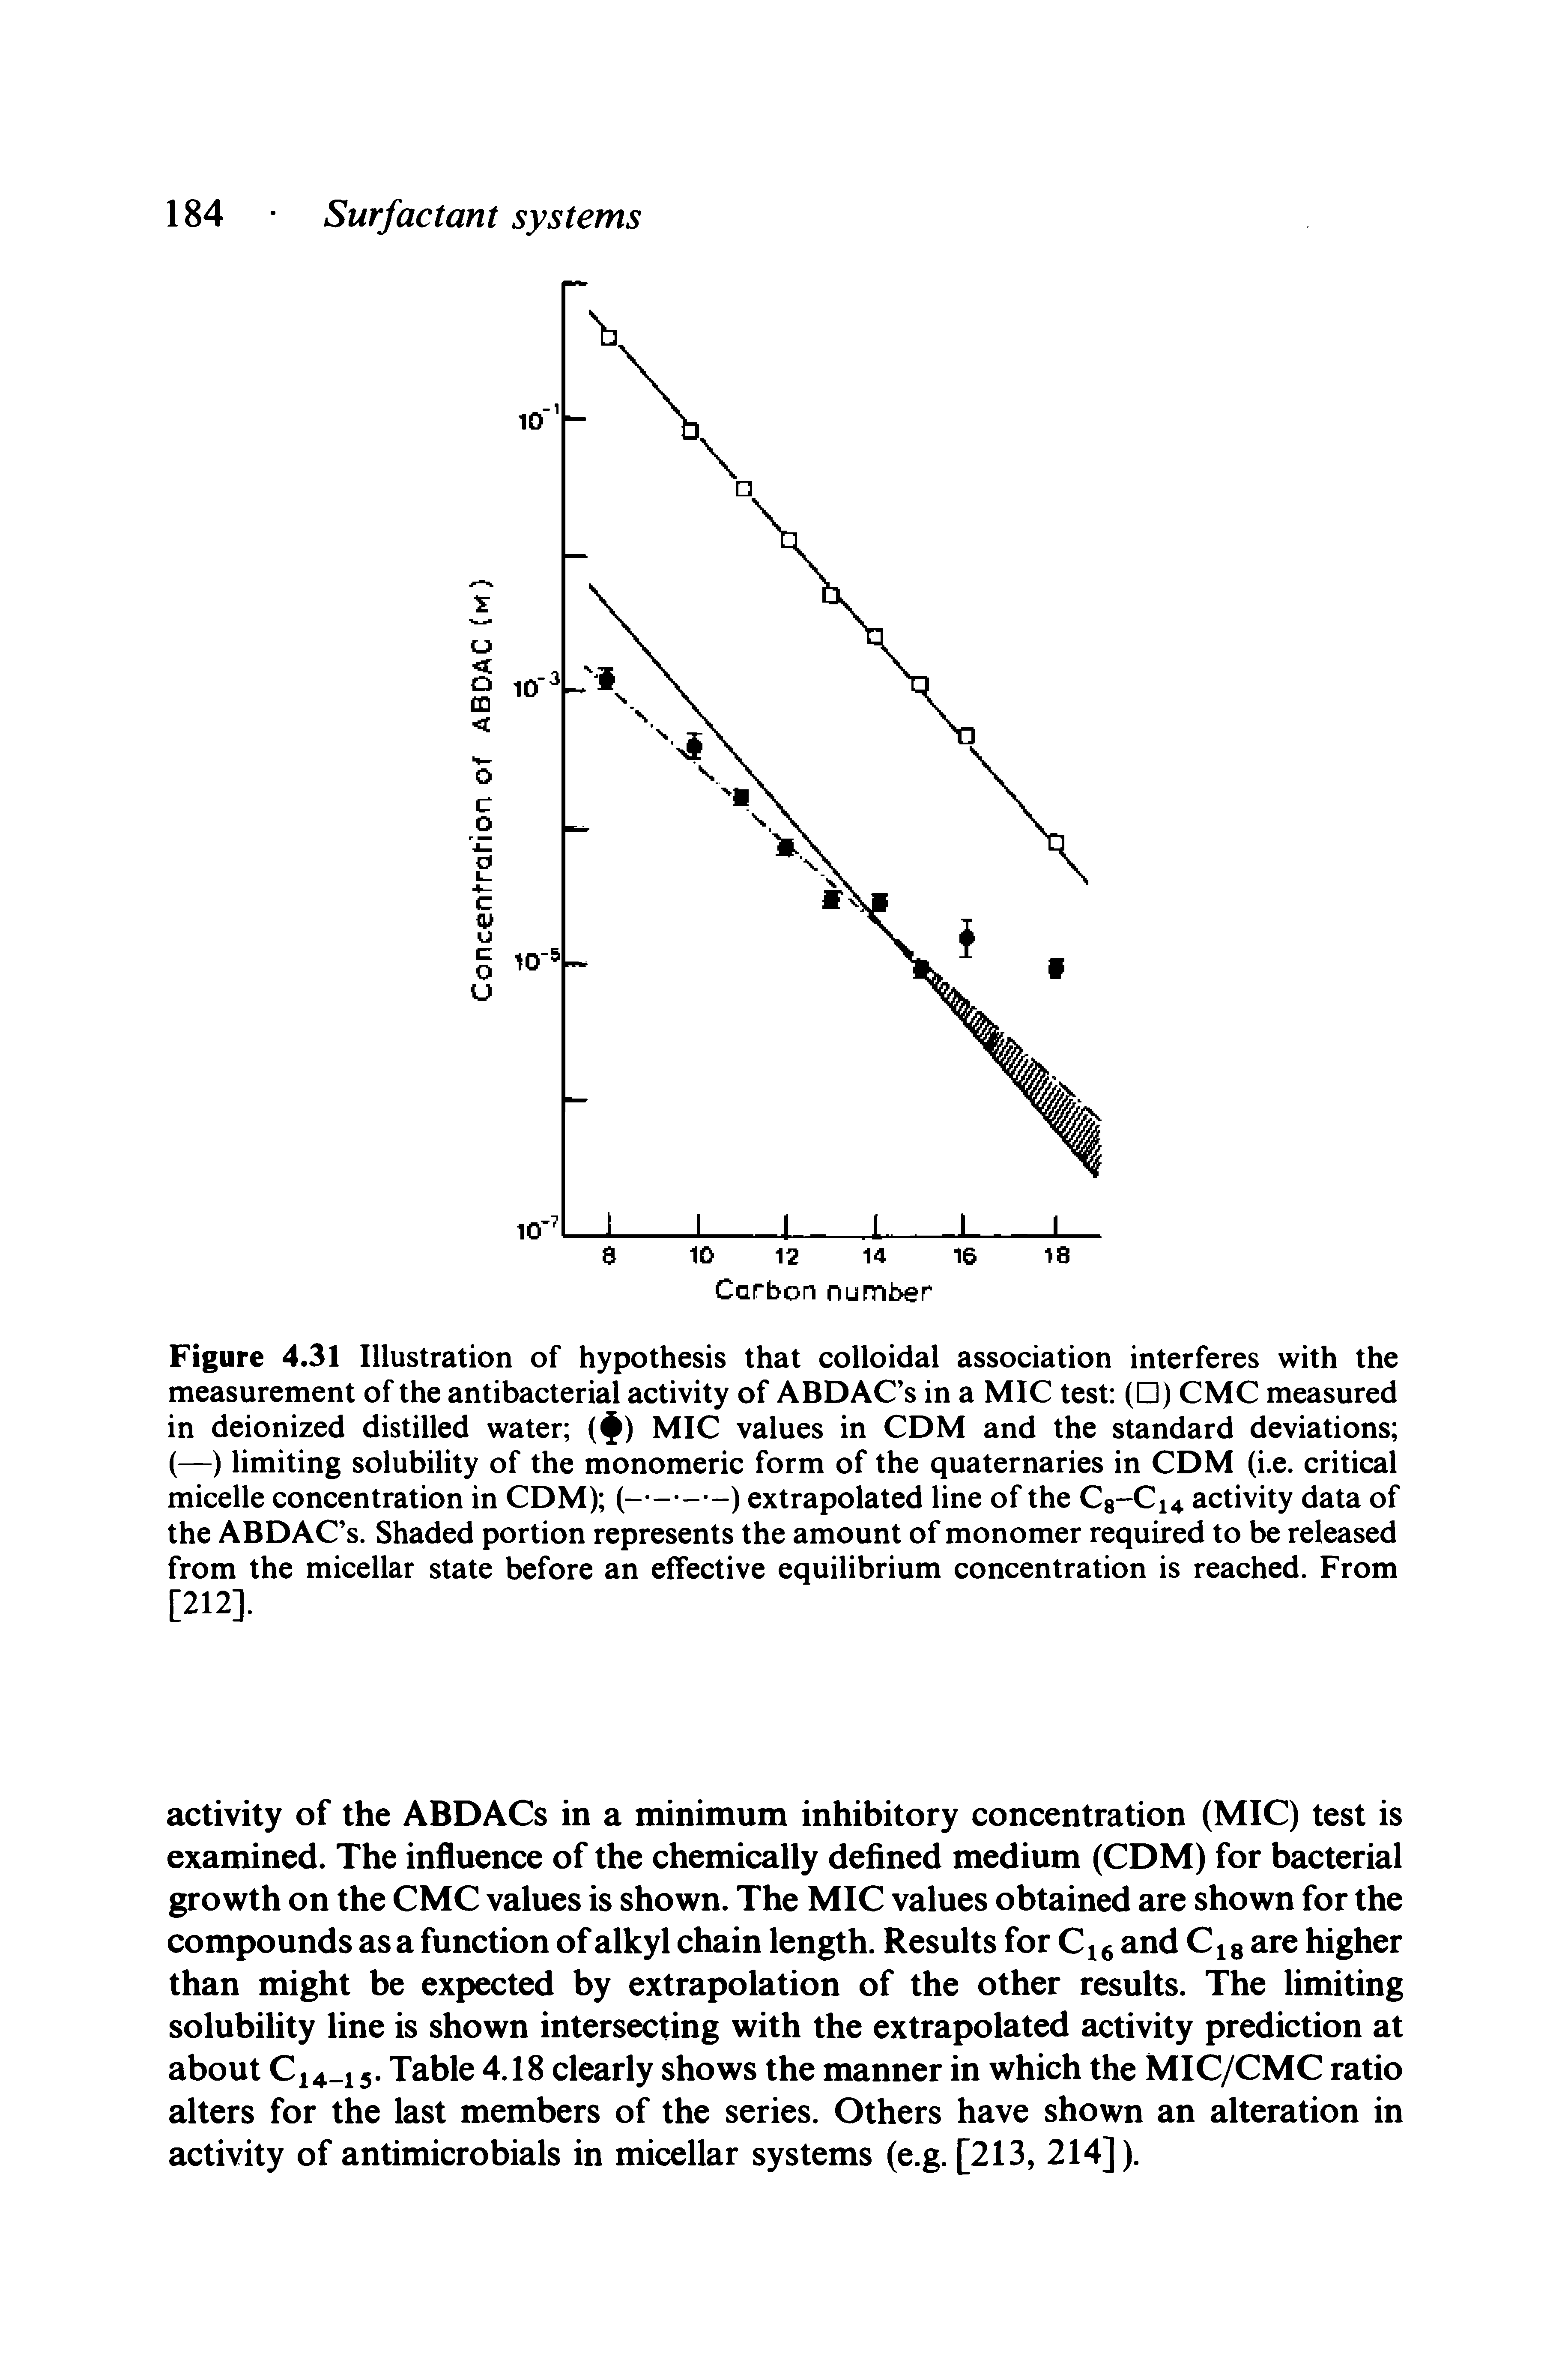 Figure 4.31 Illustration of hypothesis that colloidal association interferes with the measurement of the antibacterial activity of ABDAC s in a MIC test ( ) CMC measured in deionized distilled water ( ) MIC values in CDM and the standard deviations (—) limiting solubility of the monomeric form of the quaternaries in CDM (i.e. critical micelle concentration in CDM) (- - - -) extrapolated line of the C8-C14 activity data of the ABDAC s. Shaded portion represents the amount of monomer required to be released from the micellar state before an effective equilibrium concentration is reached. From [212].